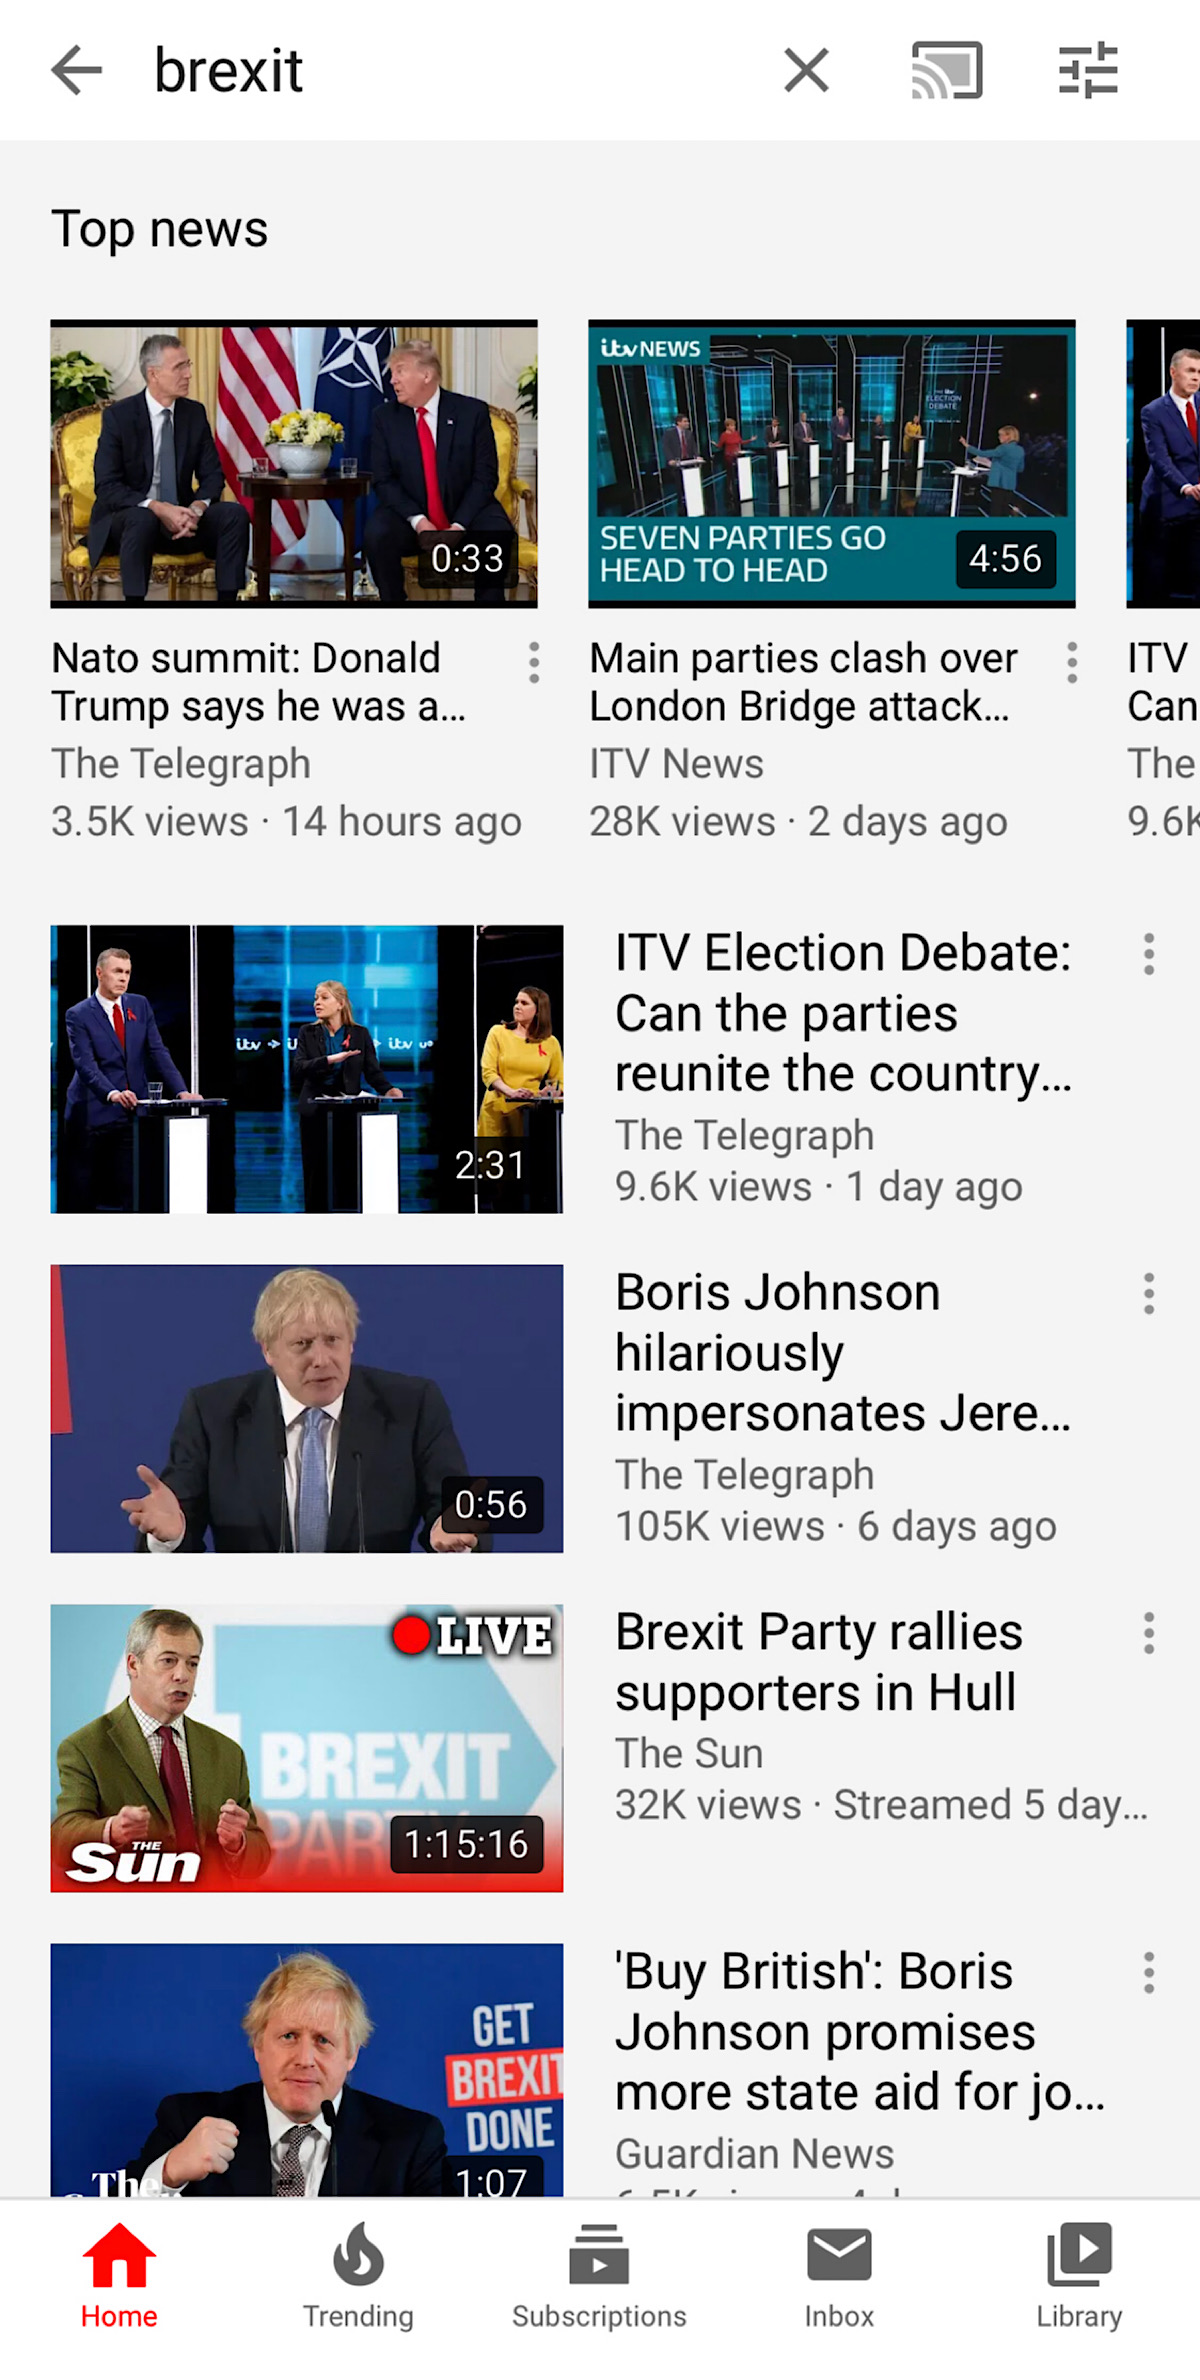 YouTube search results for “Brexit”